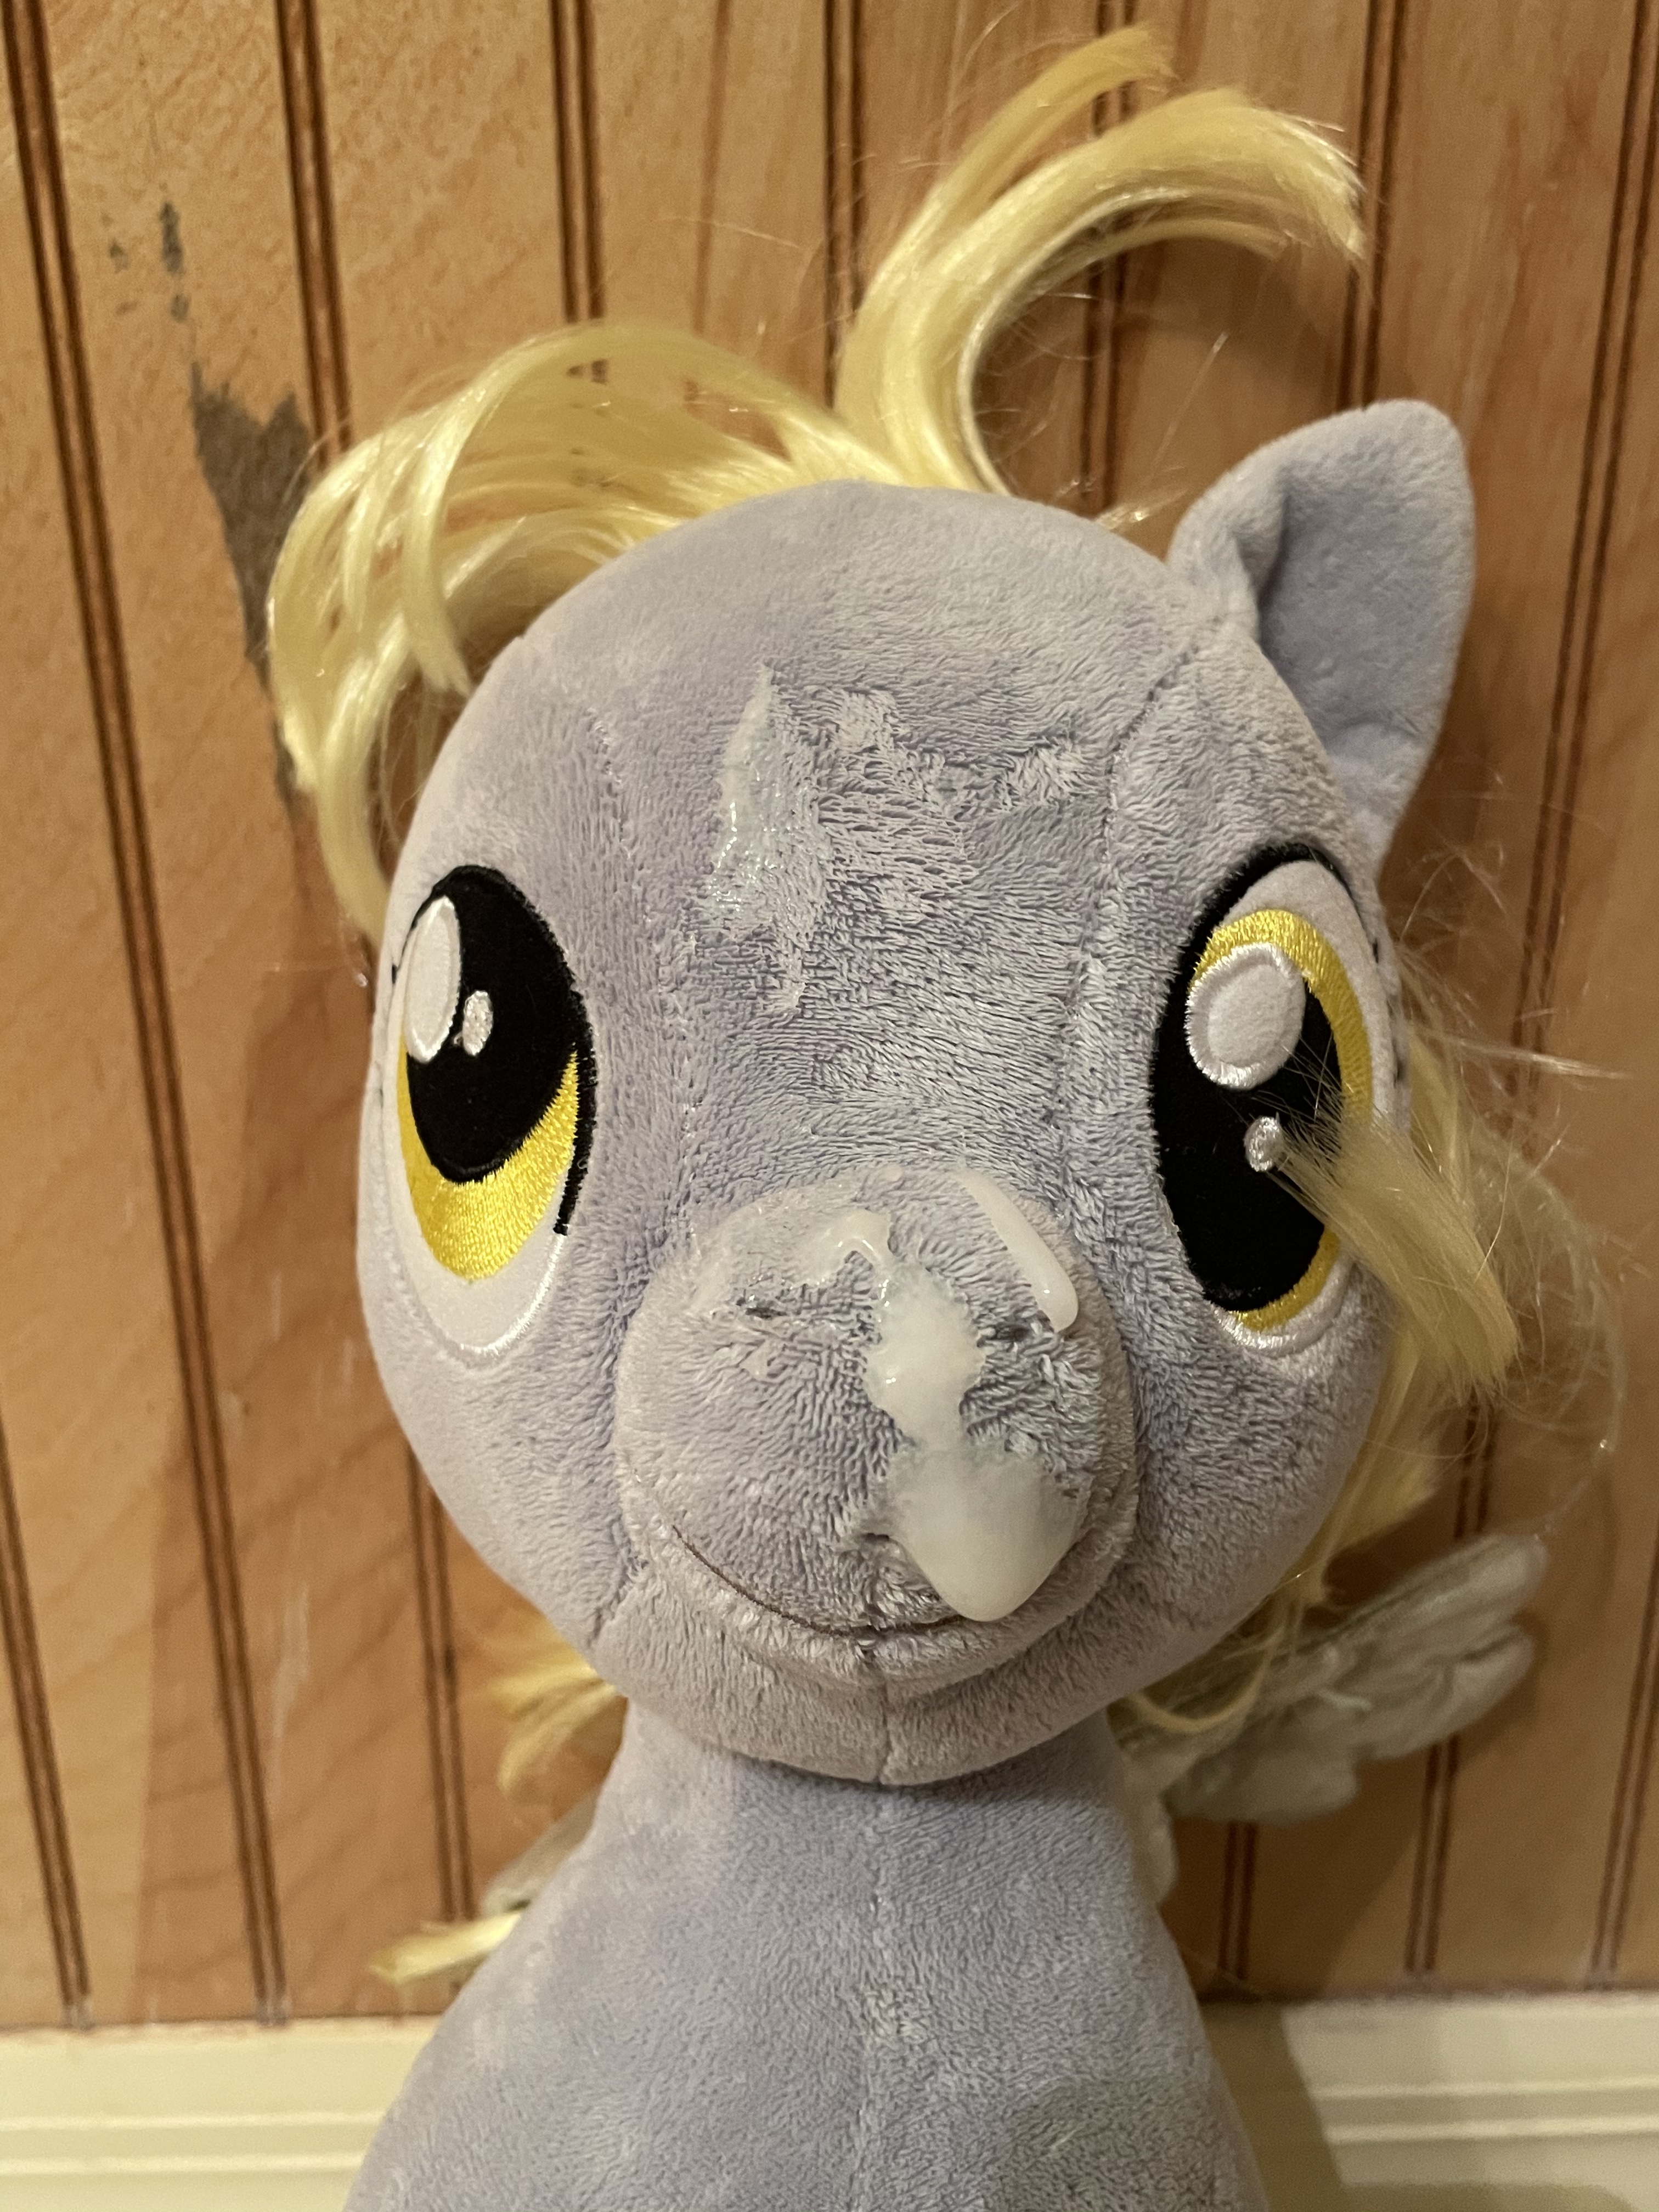 Image 3866: character:derpy_hooves creator:jamesw69 cum cum_on_plushie toy: build-a-bear toy:plushie